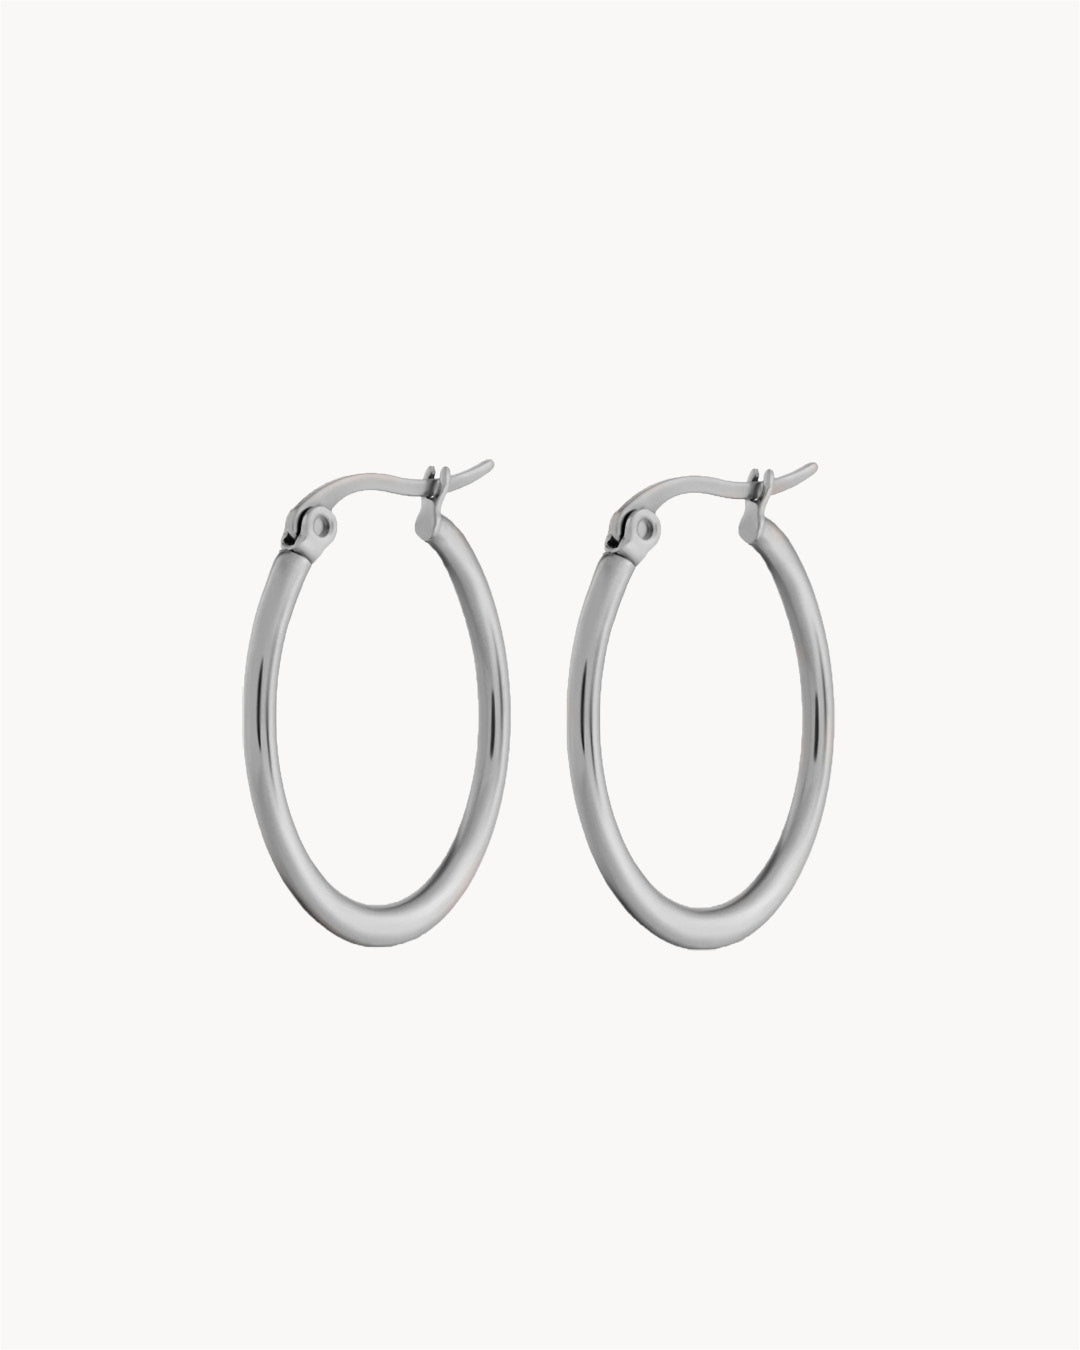 Large Signature Hoops, Silver